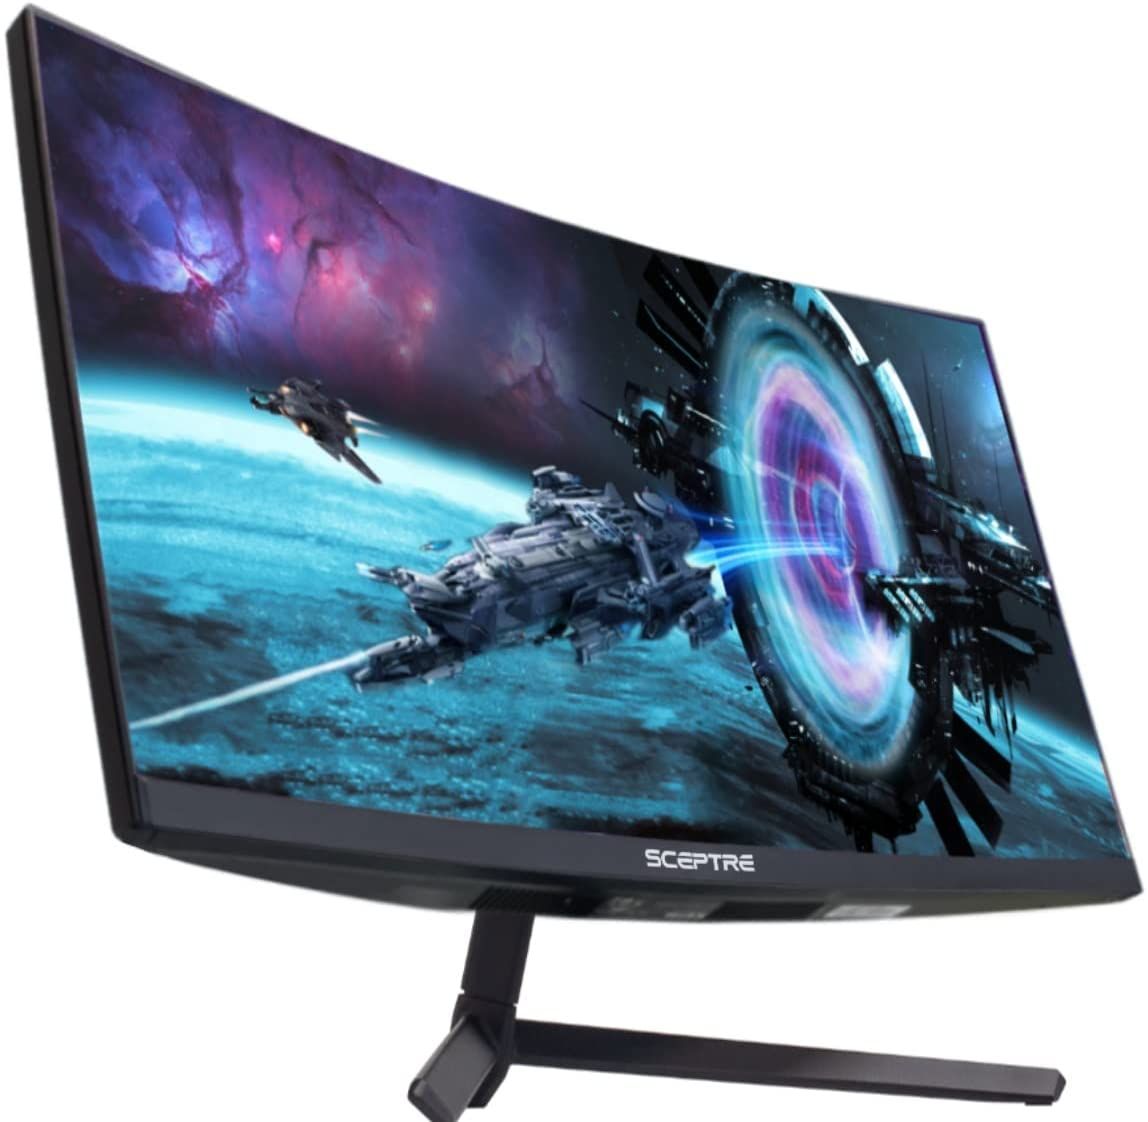 A 27-inch Full HD Monitor with a 165Hz refresh rate and AMD FreeSync Premium support. It has a 3ms response time and speakers built in.